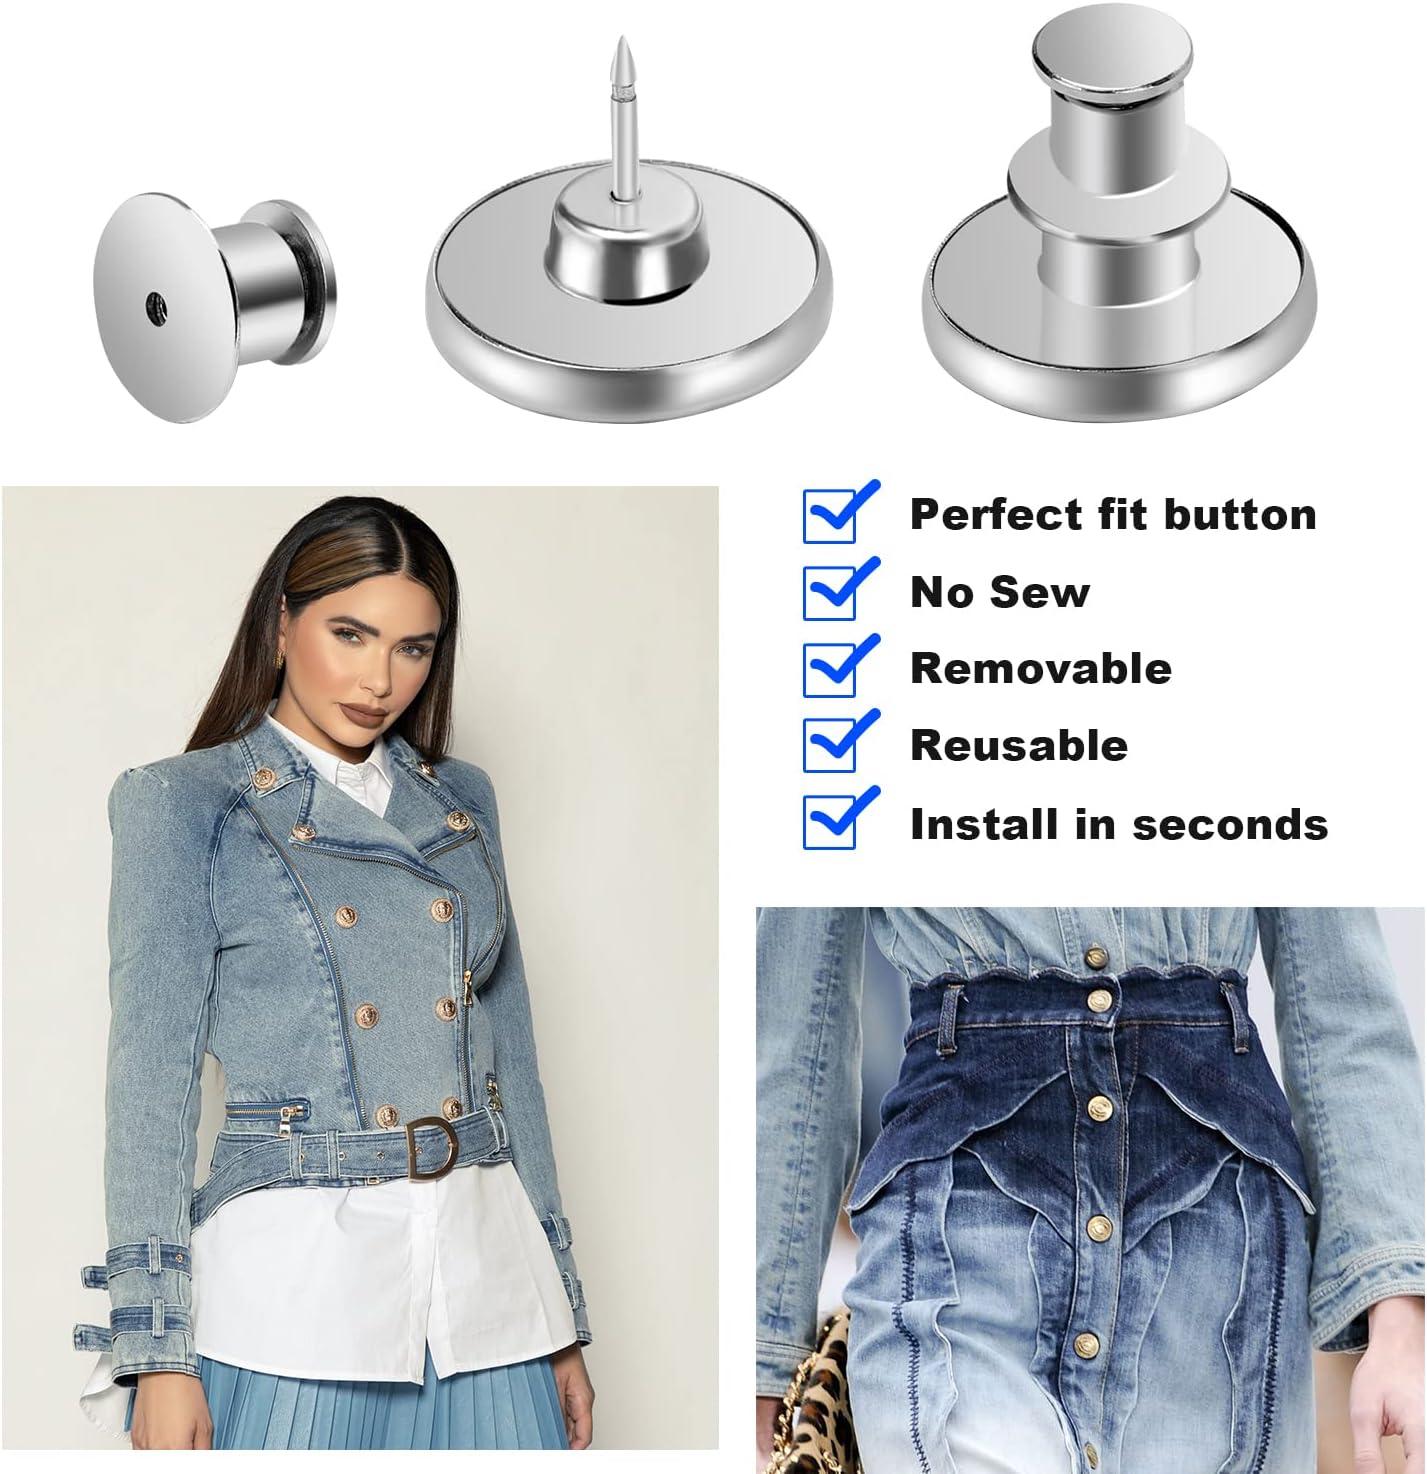 12 Sets Button Pins for Jeans, Jean Buttons Pins for Loose Jeans, No Sew  and No Tools Instant Replacement Snap Tack Pant Button, Ceryvop Reusable  and Adjustable Metal Pants Button Tightener